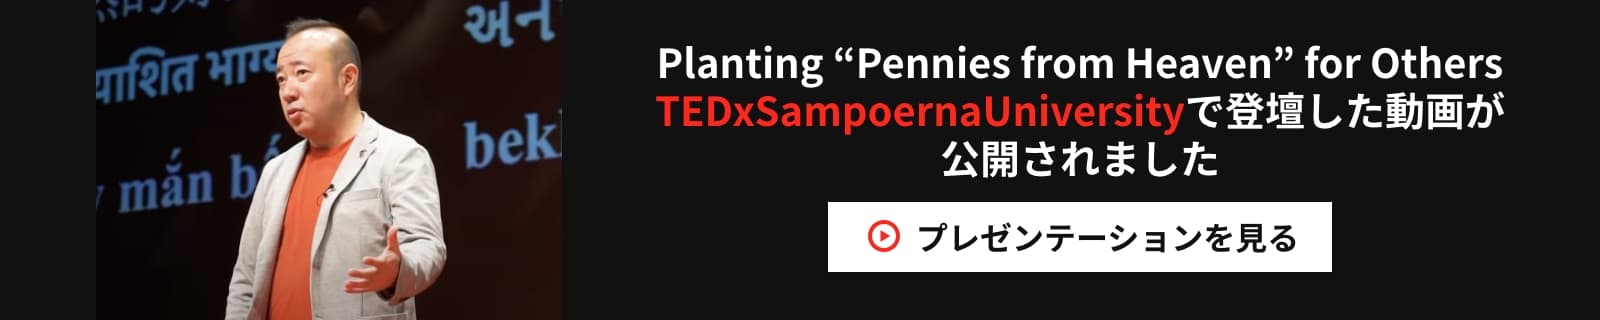 Planting Pennies from Heaven for Others TEDxSampoernaUniversityで登壇した動画が公開されました プレゼンテーションを見る